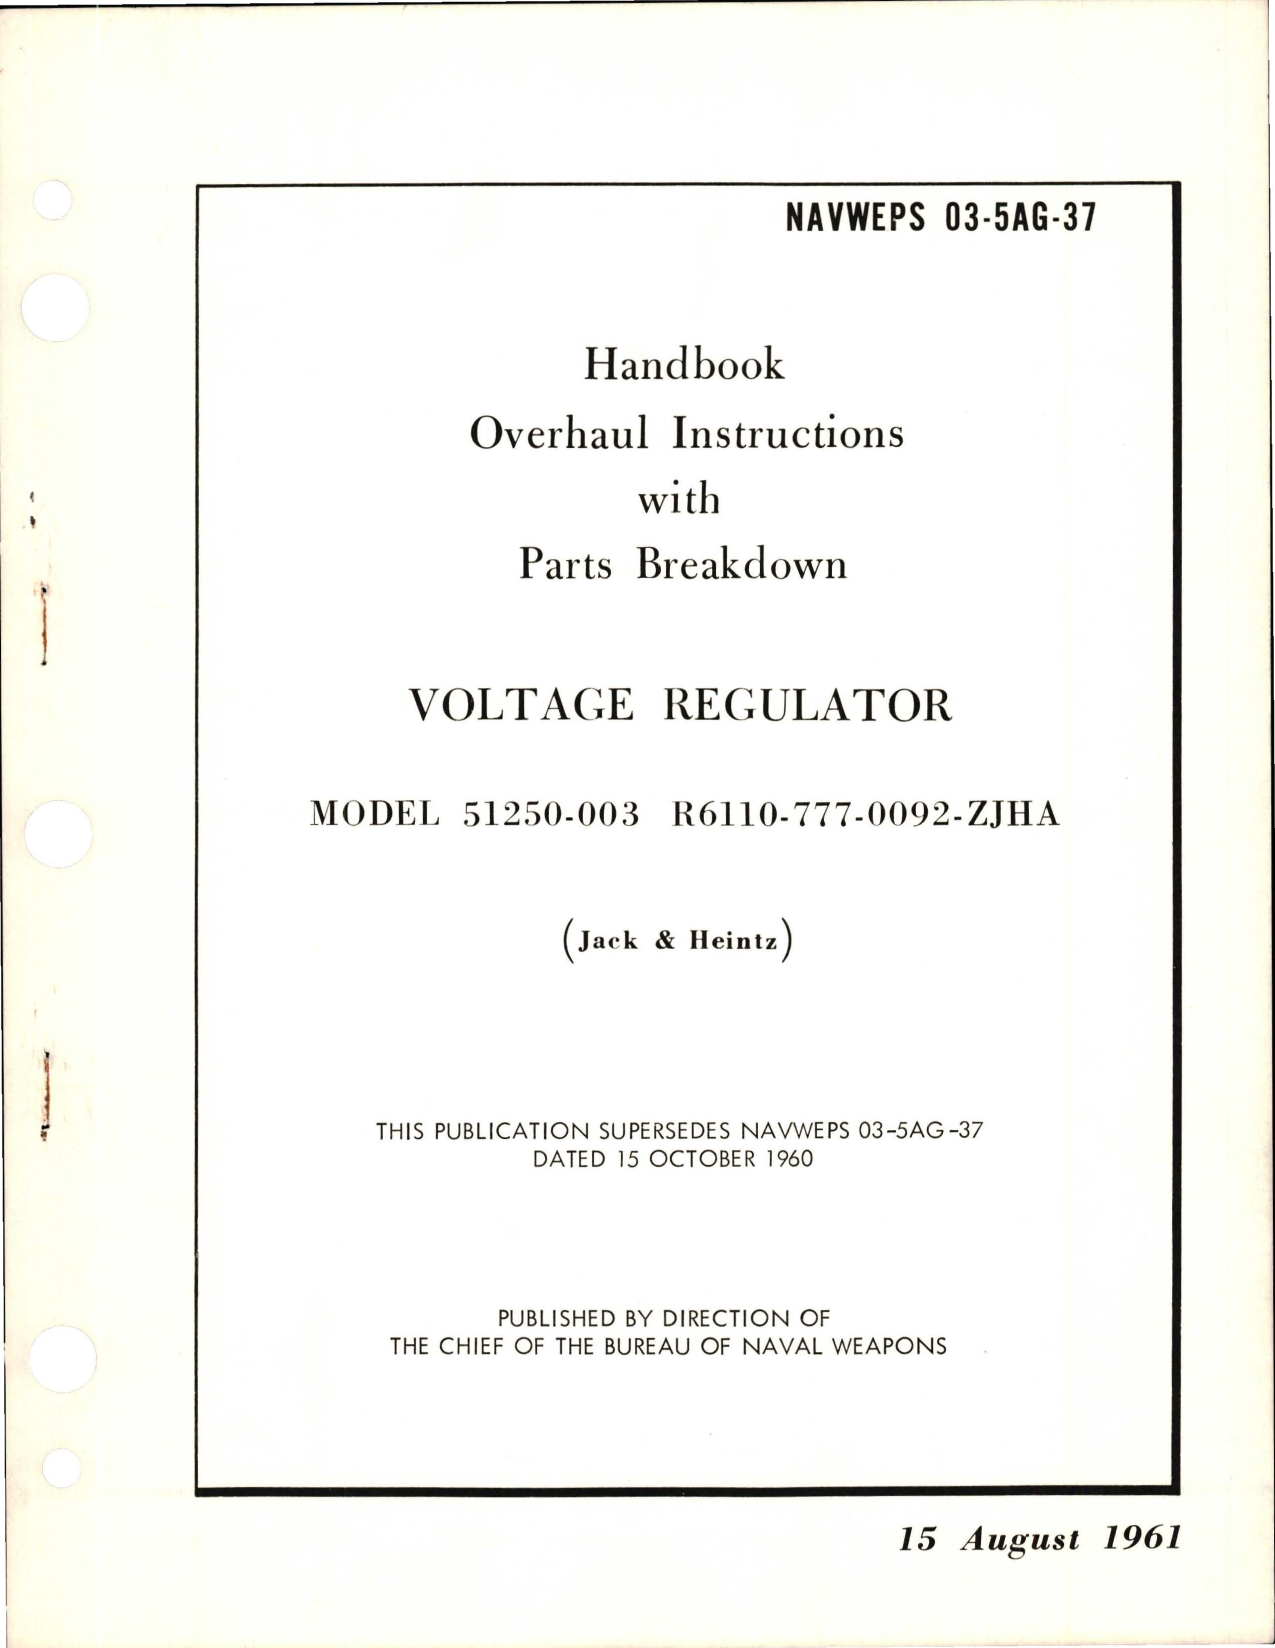 Sample page 1 from AirCorps Library document: Overhaul Instructions with Parts Breakdown for Voltage Regulator - Models 51250-003 and R6110-777-0092-ZJHA